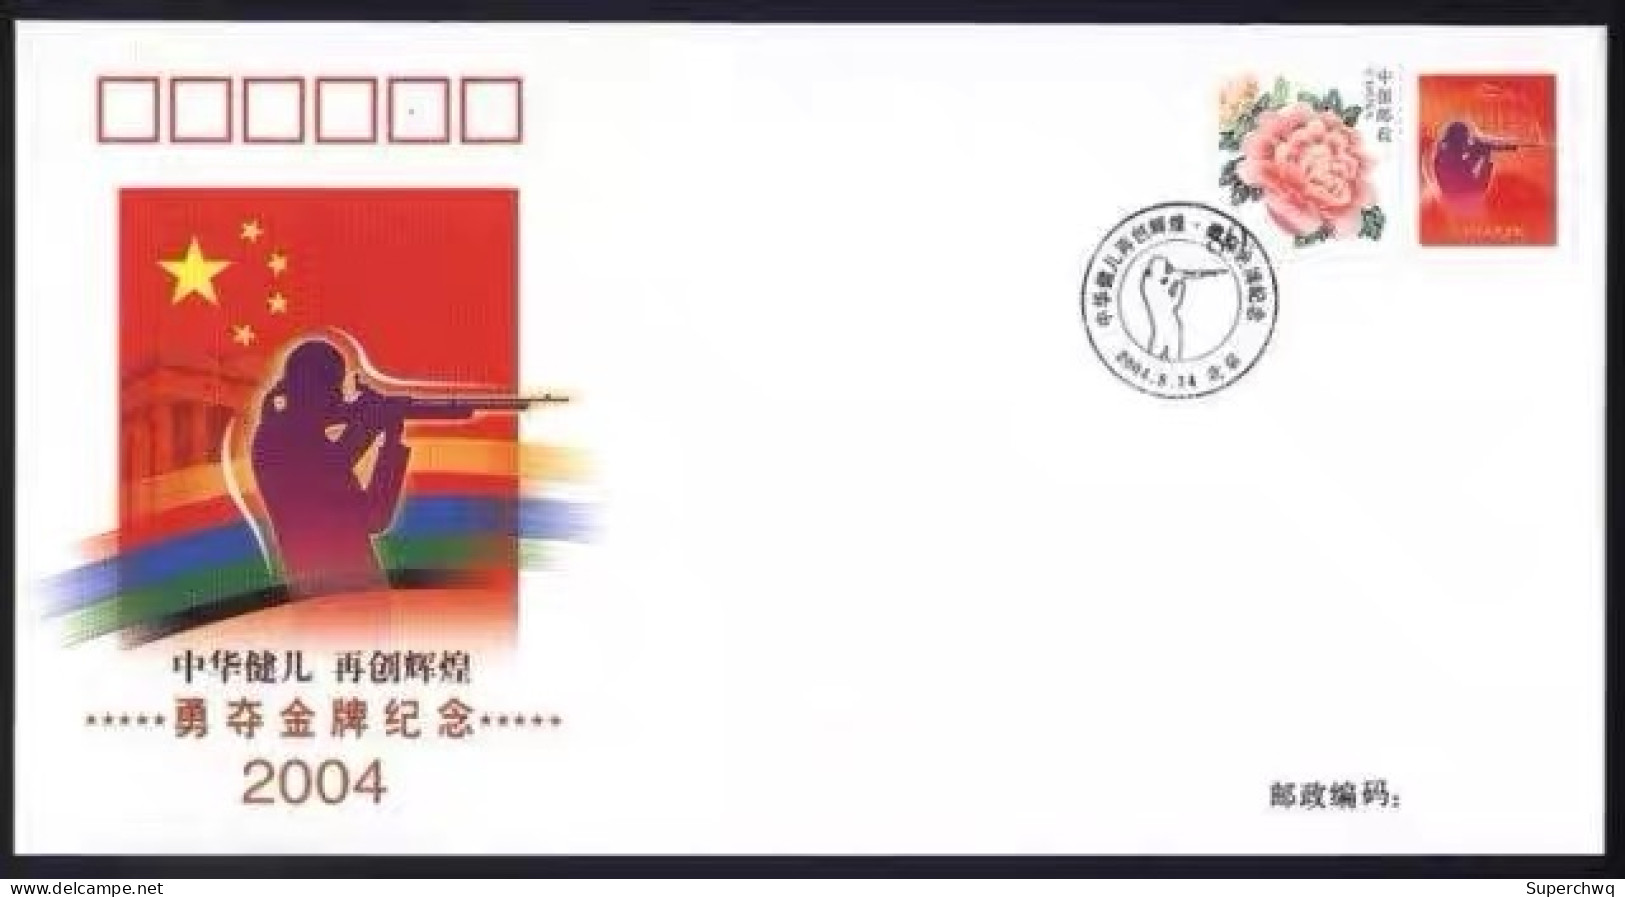 China cover,The Chinese Delegation Won The Gold Medal At The 2004 Athens Olympics，32 Covers - Covers